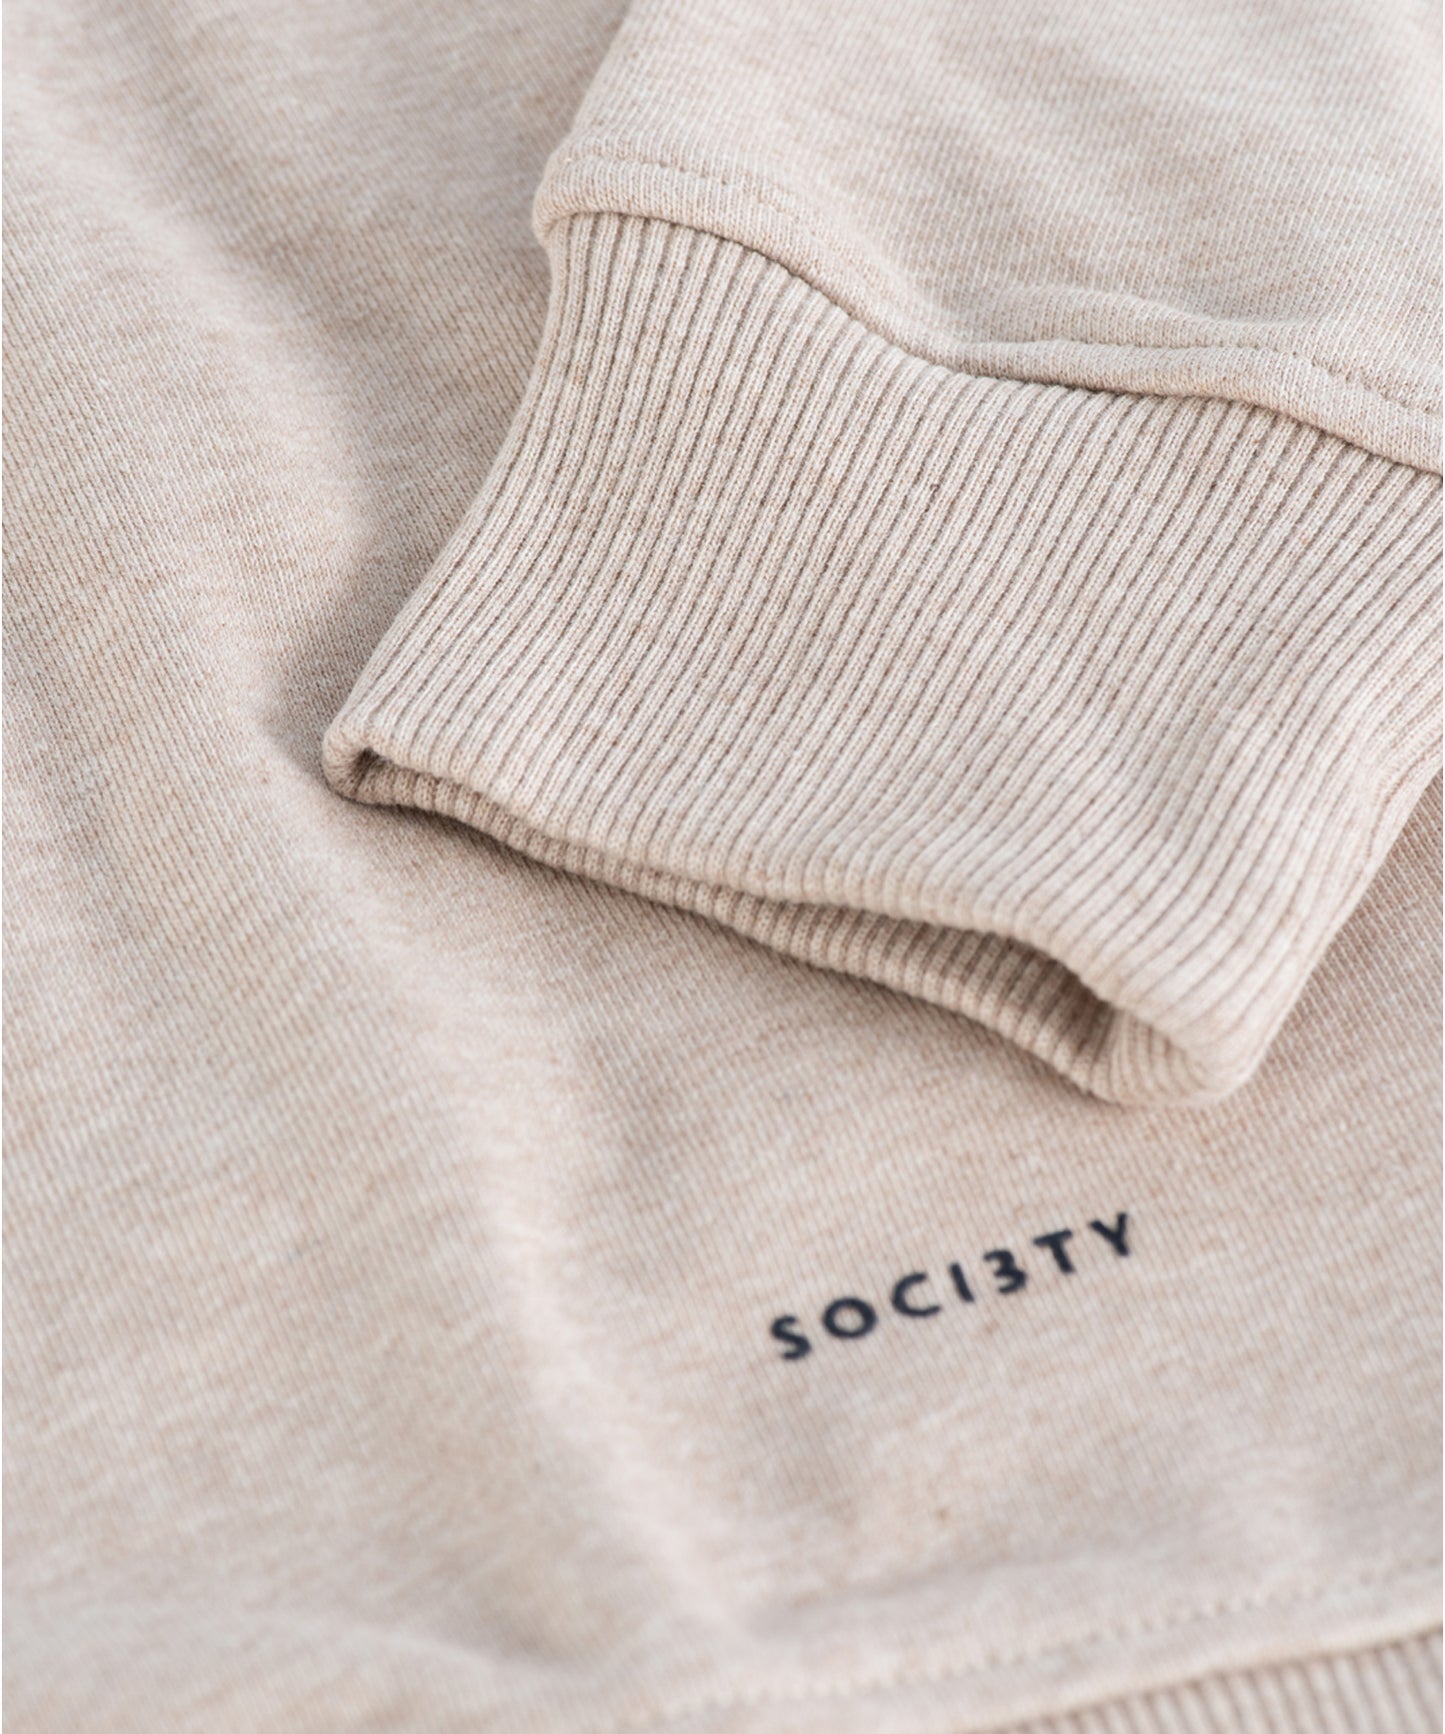 SWATER CREWNECK CO L / Beige / taupe